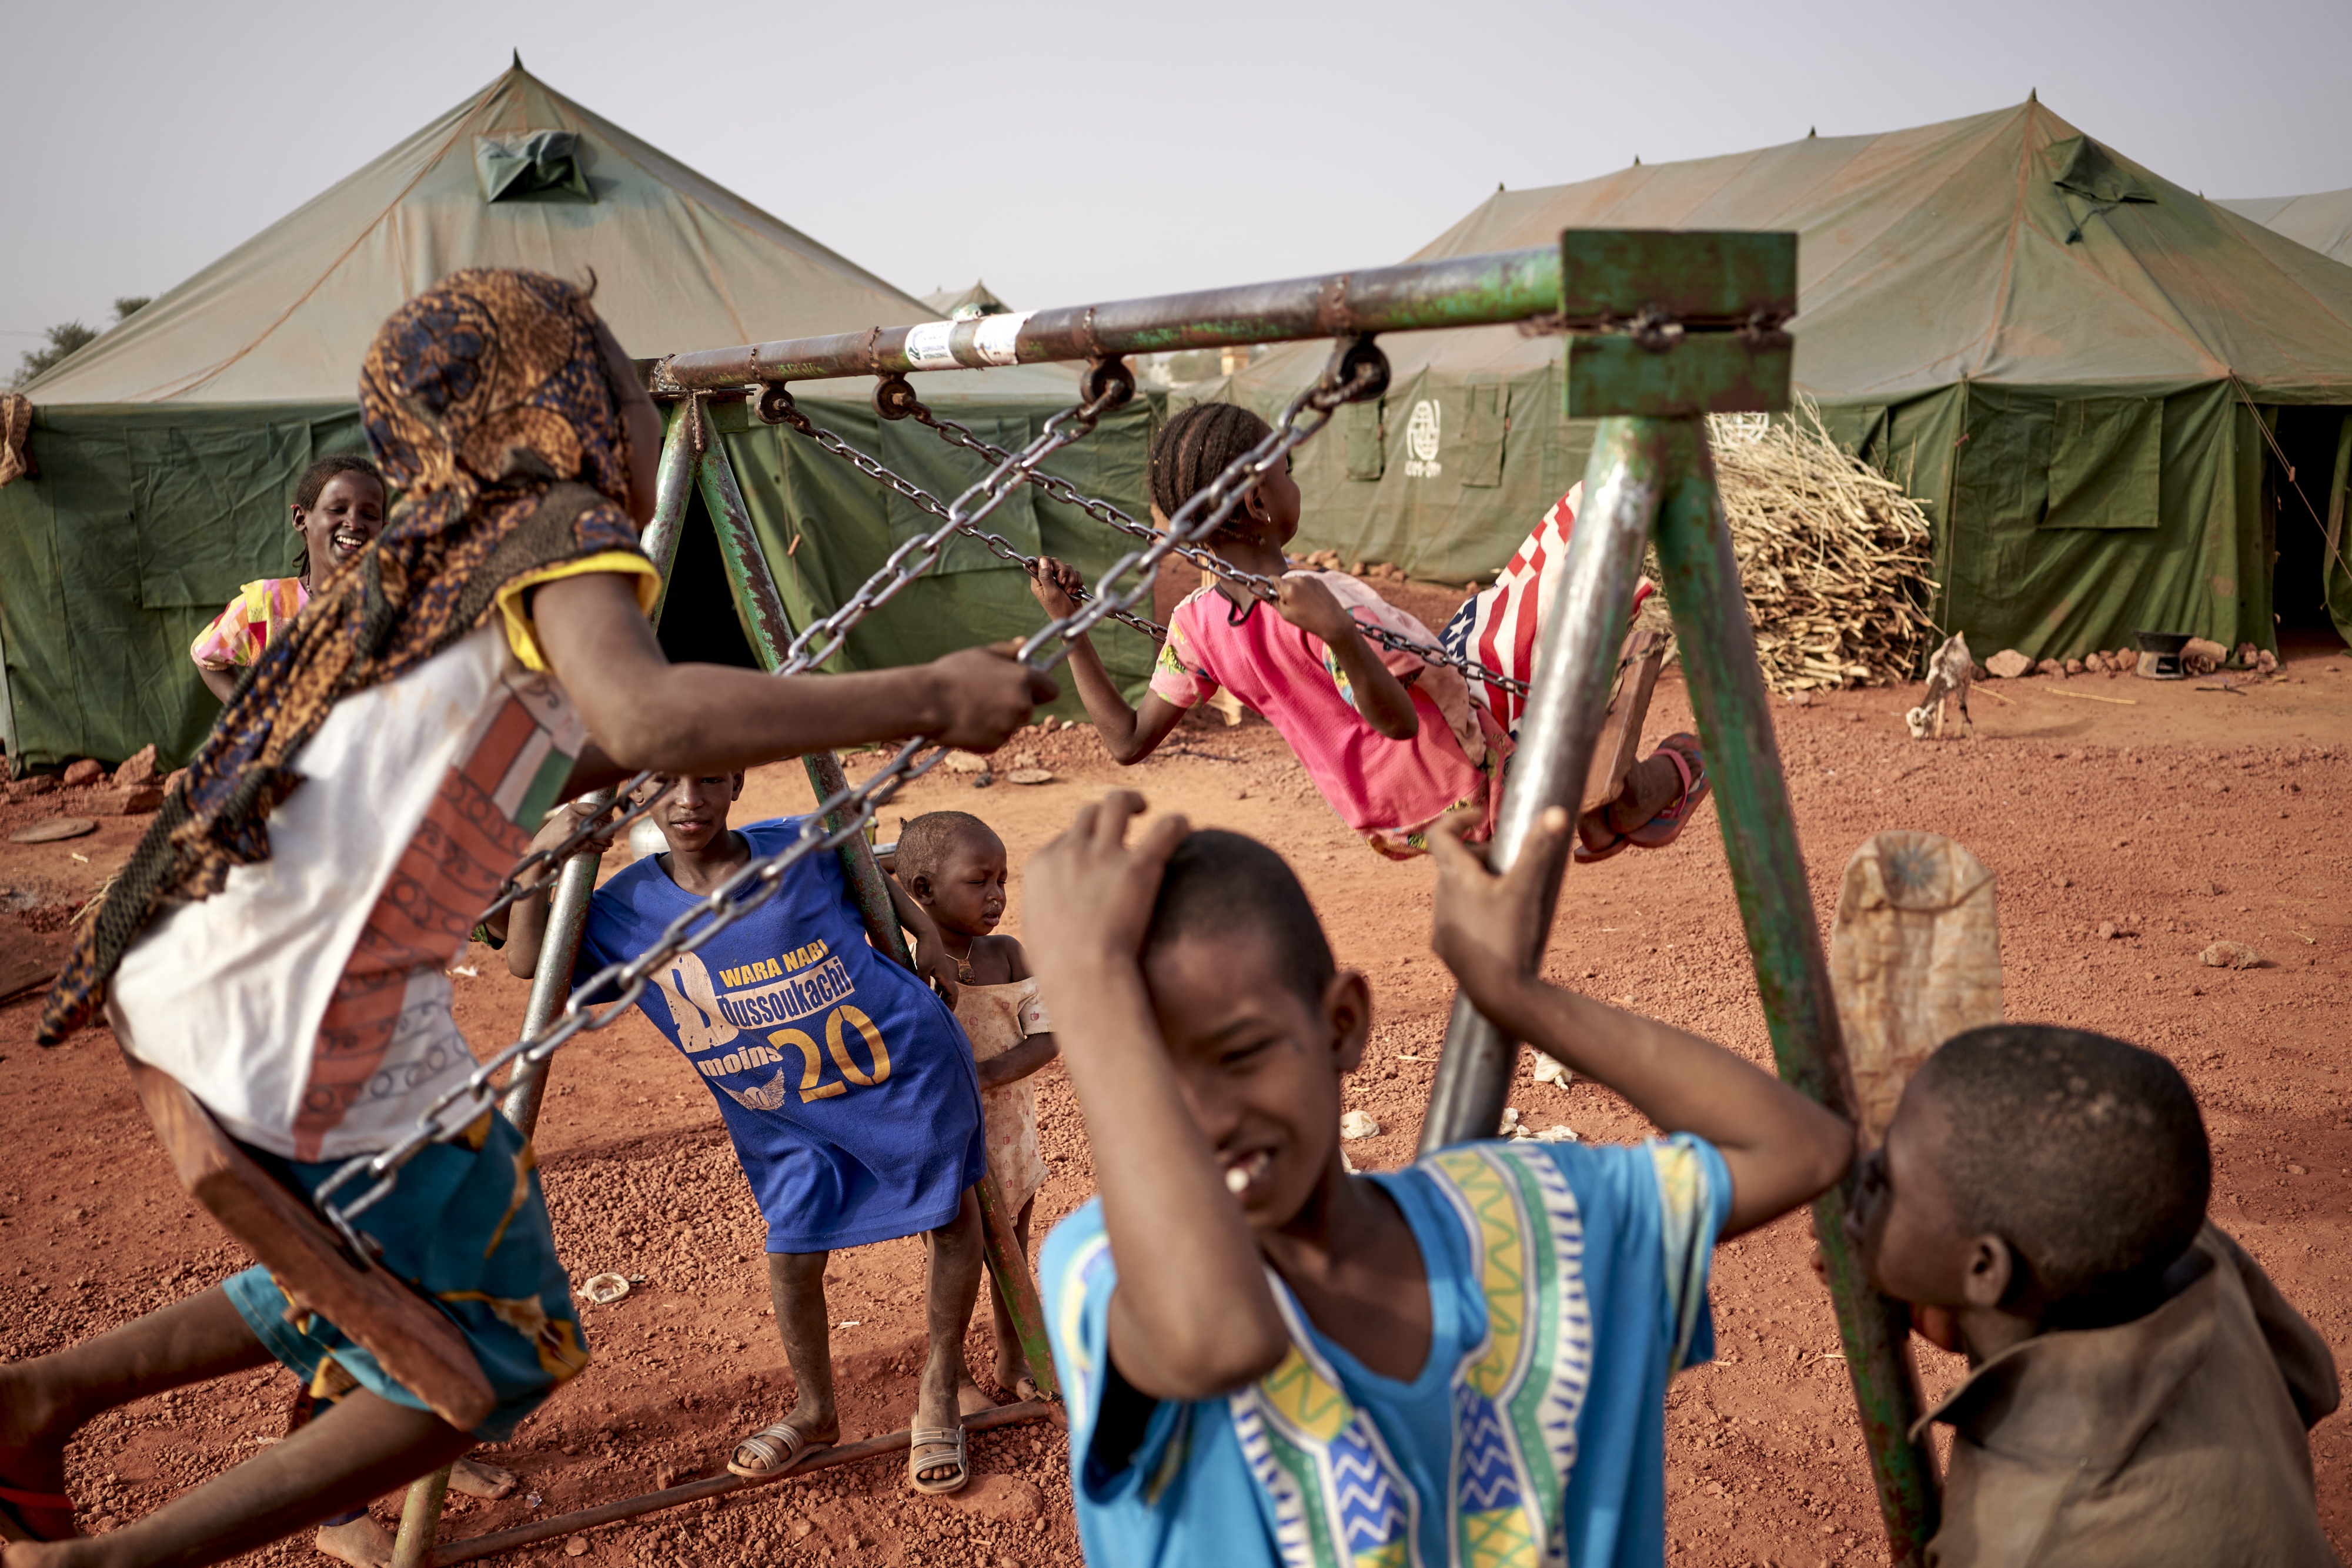  A group of children play in a camp for internally displaced people in Sevare, Mali, February 28, 2020.